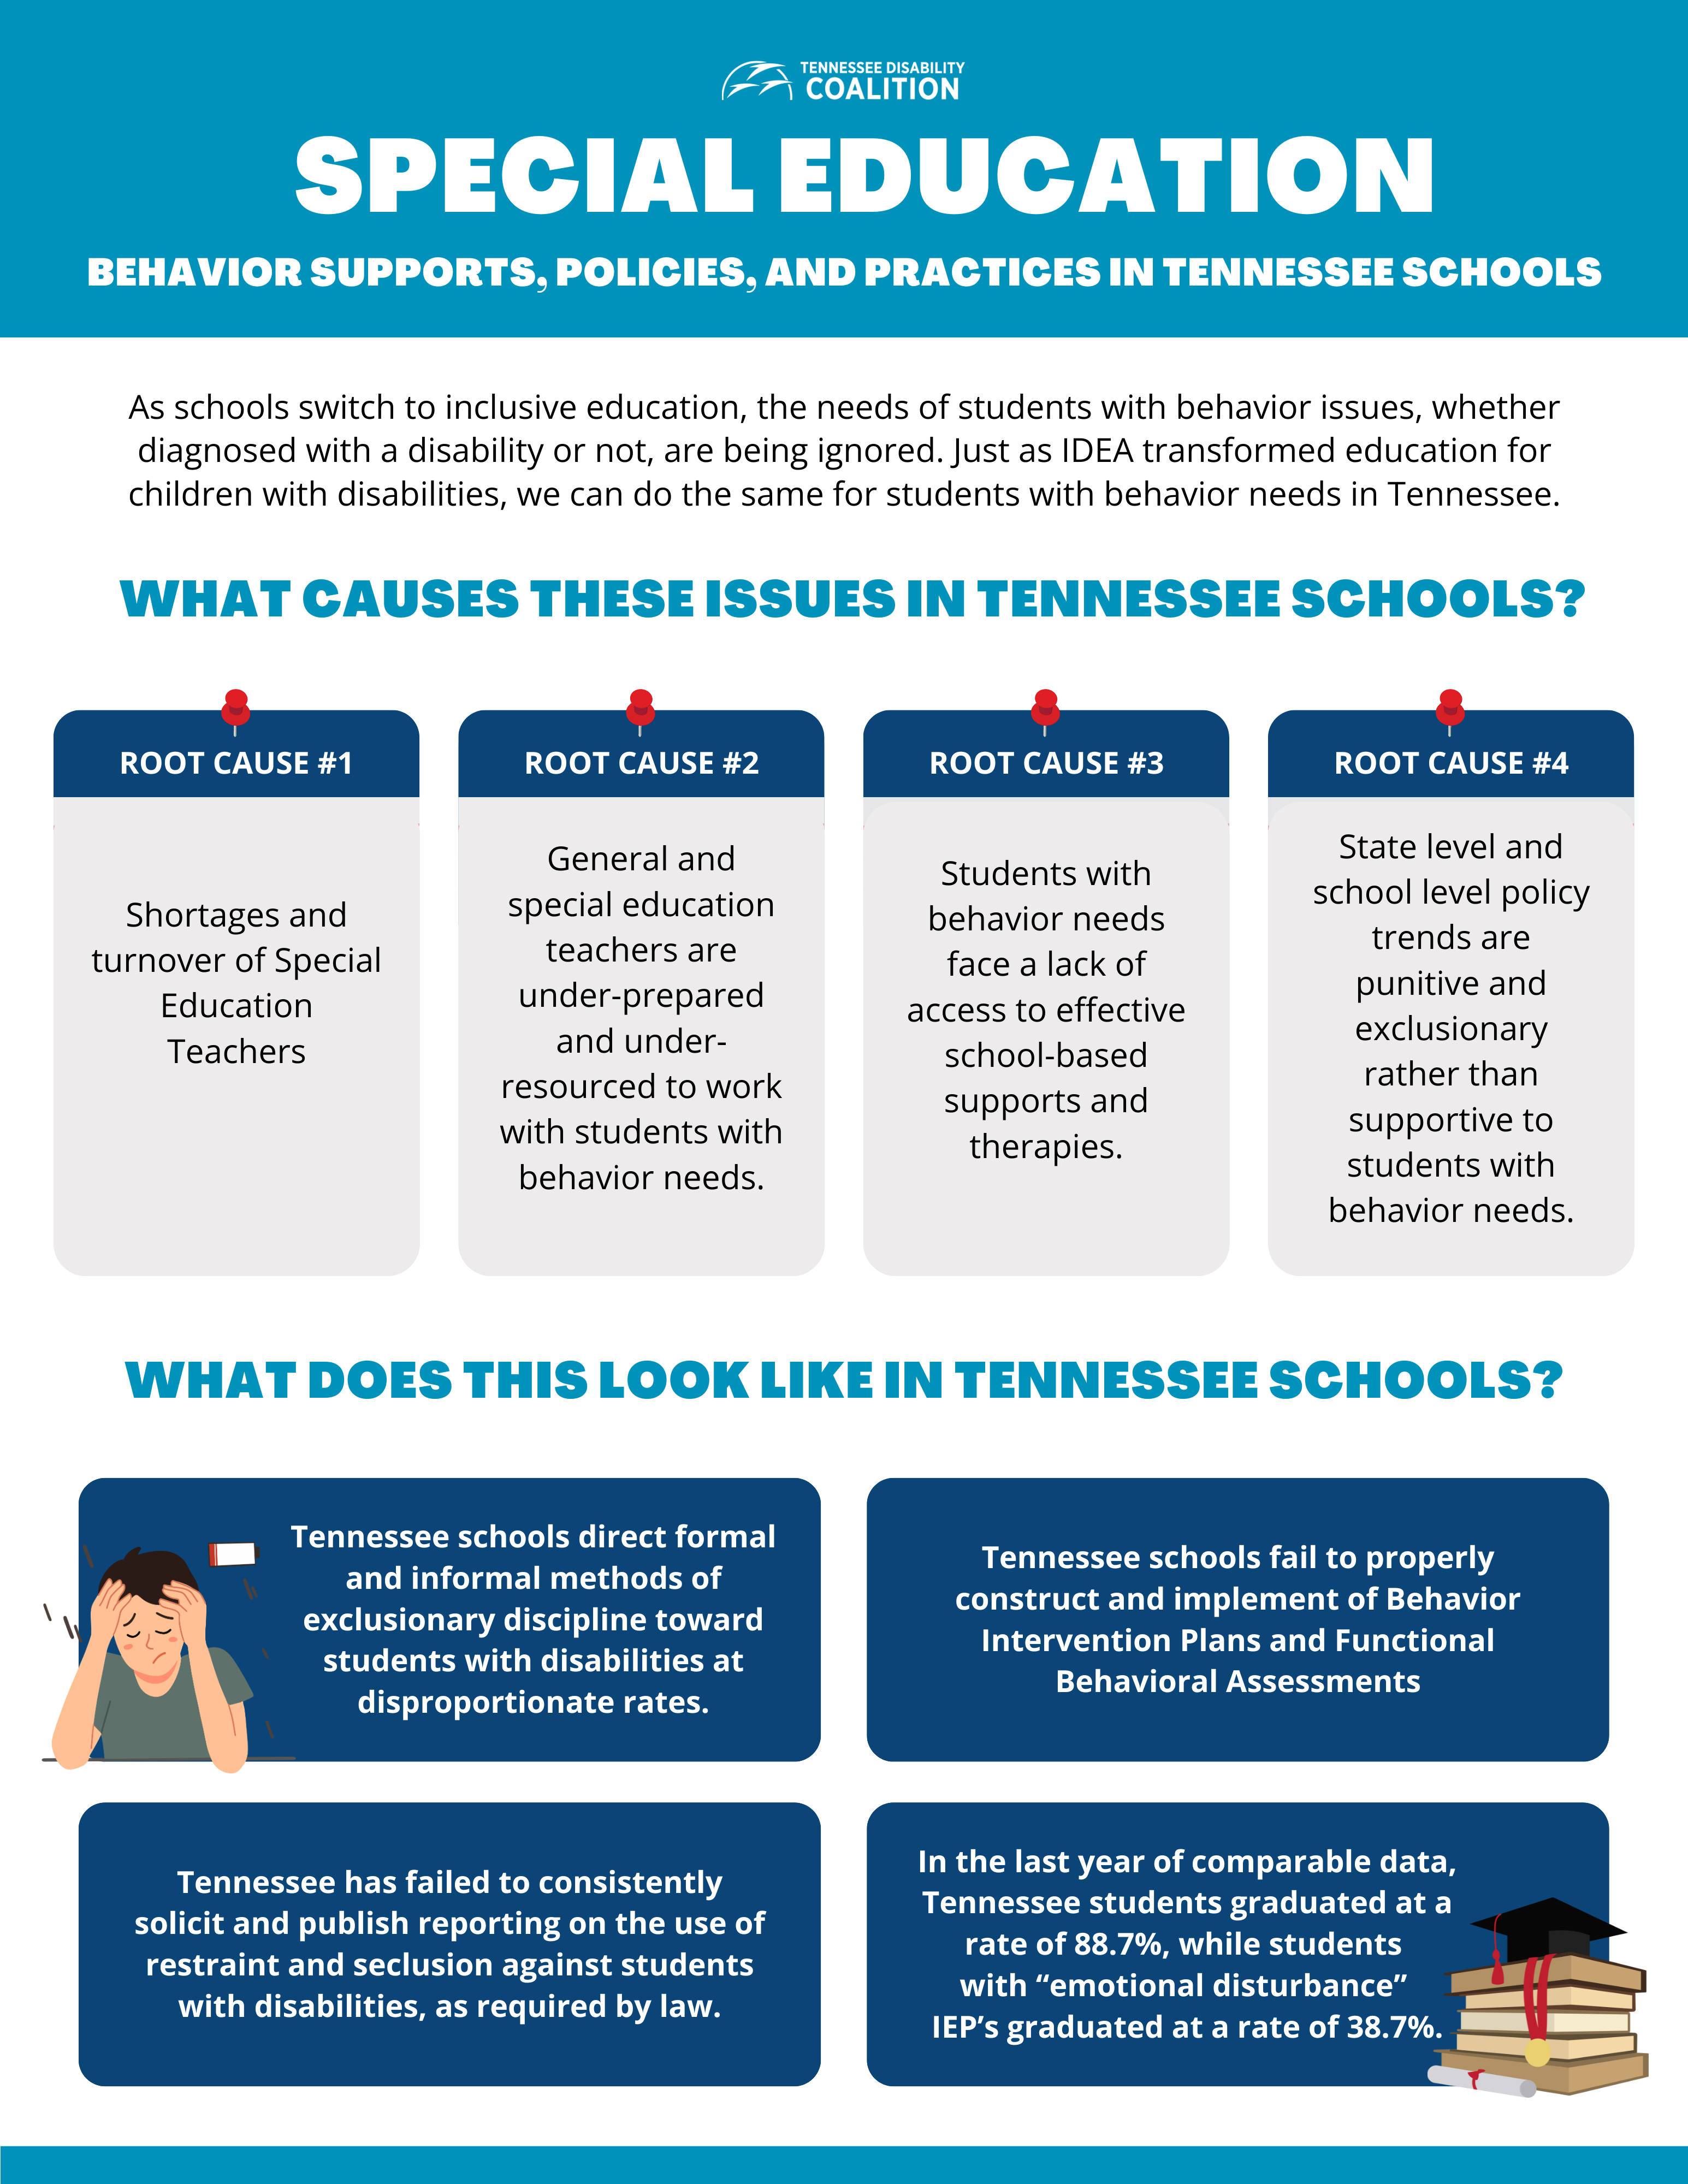 Preview of "Special Education: Behavior Supports" one-pager